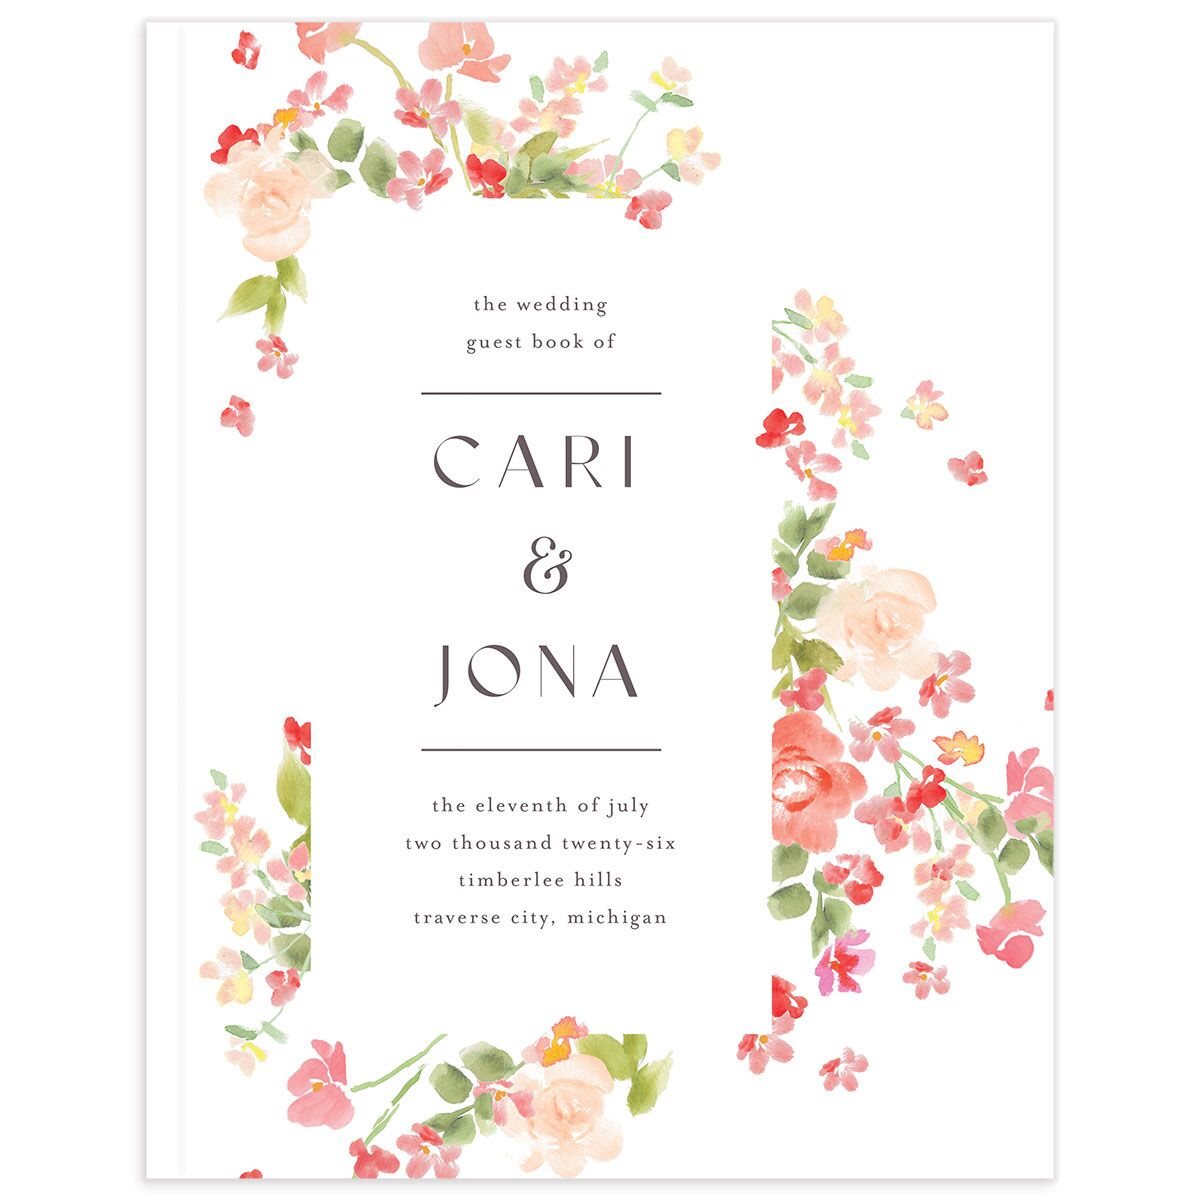 Scattered Blossoms Wedding Guest Book